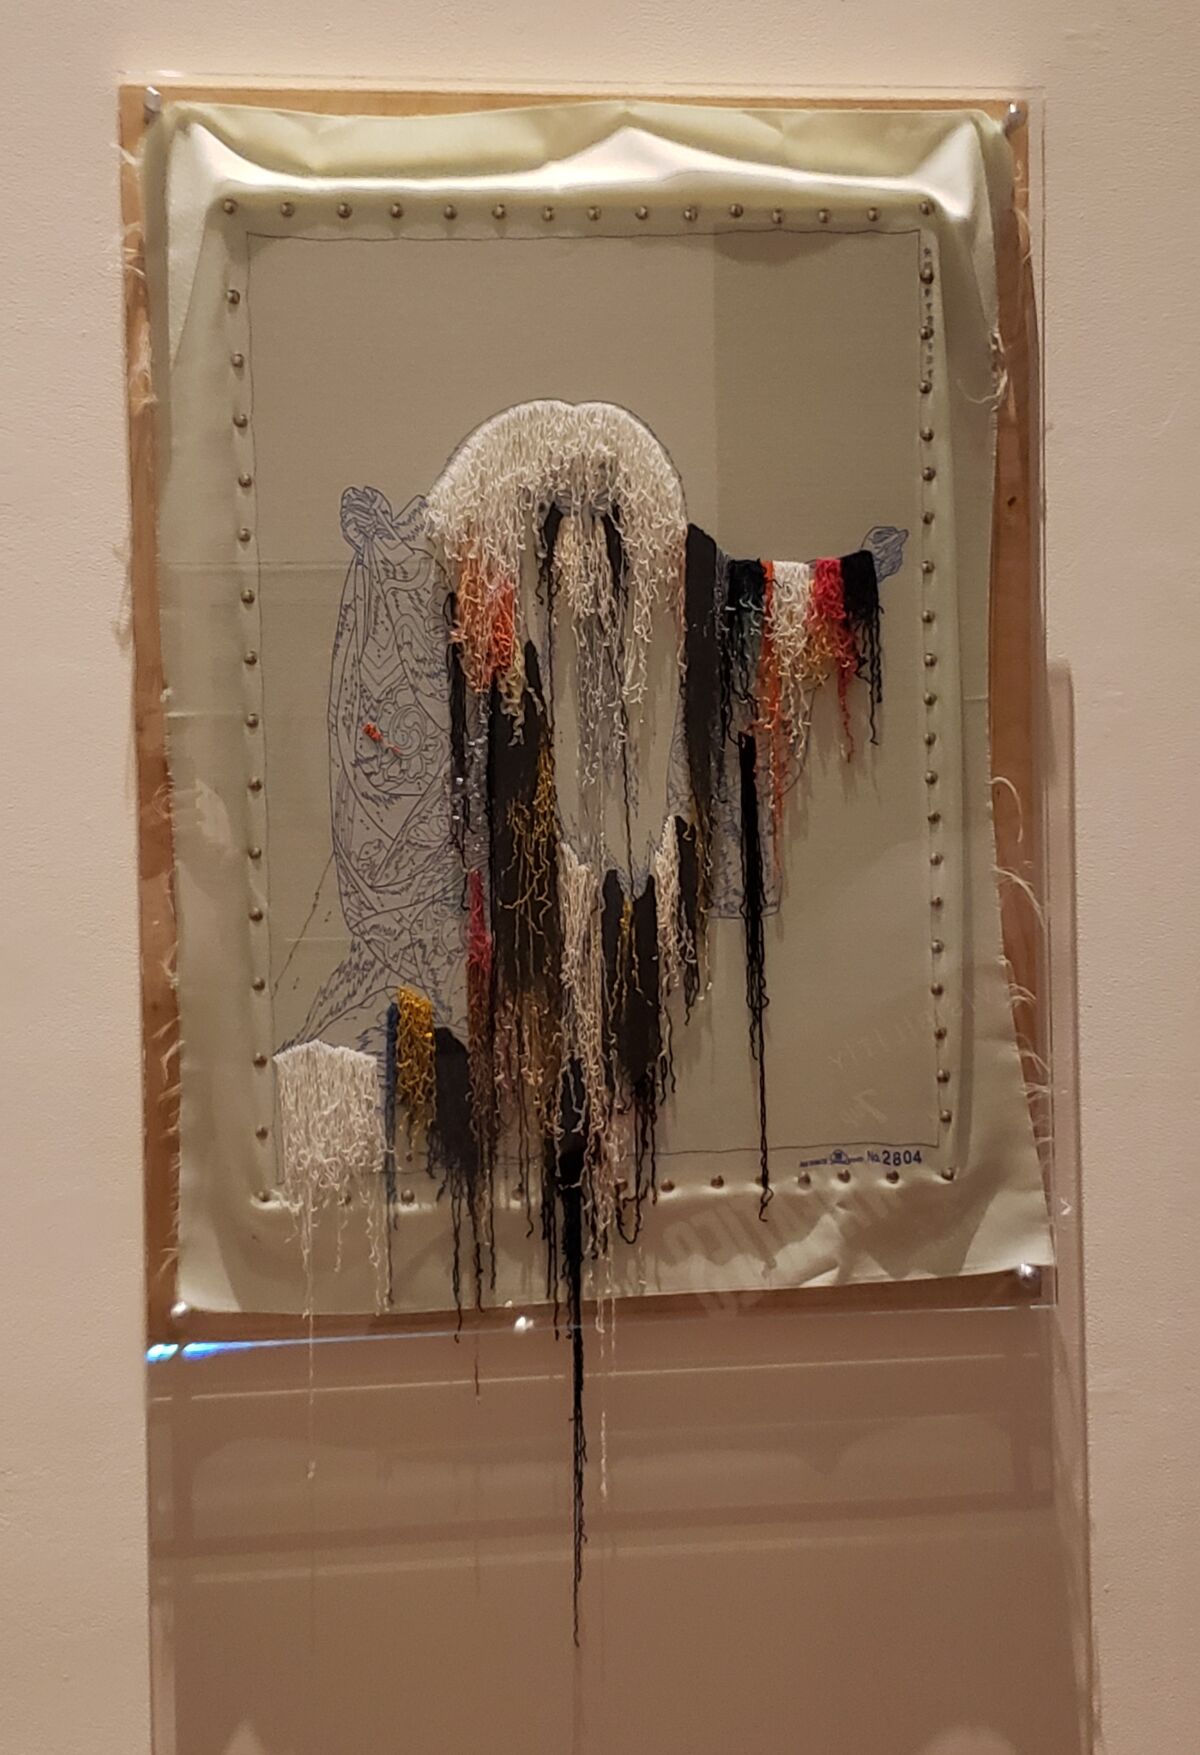 Colorful embroidery threads hang loose in Glenn Kaino's "Open Thread."